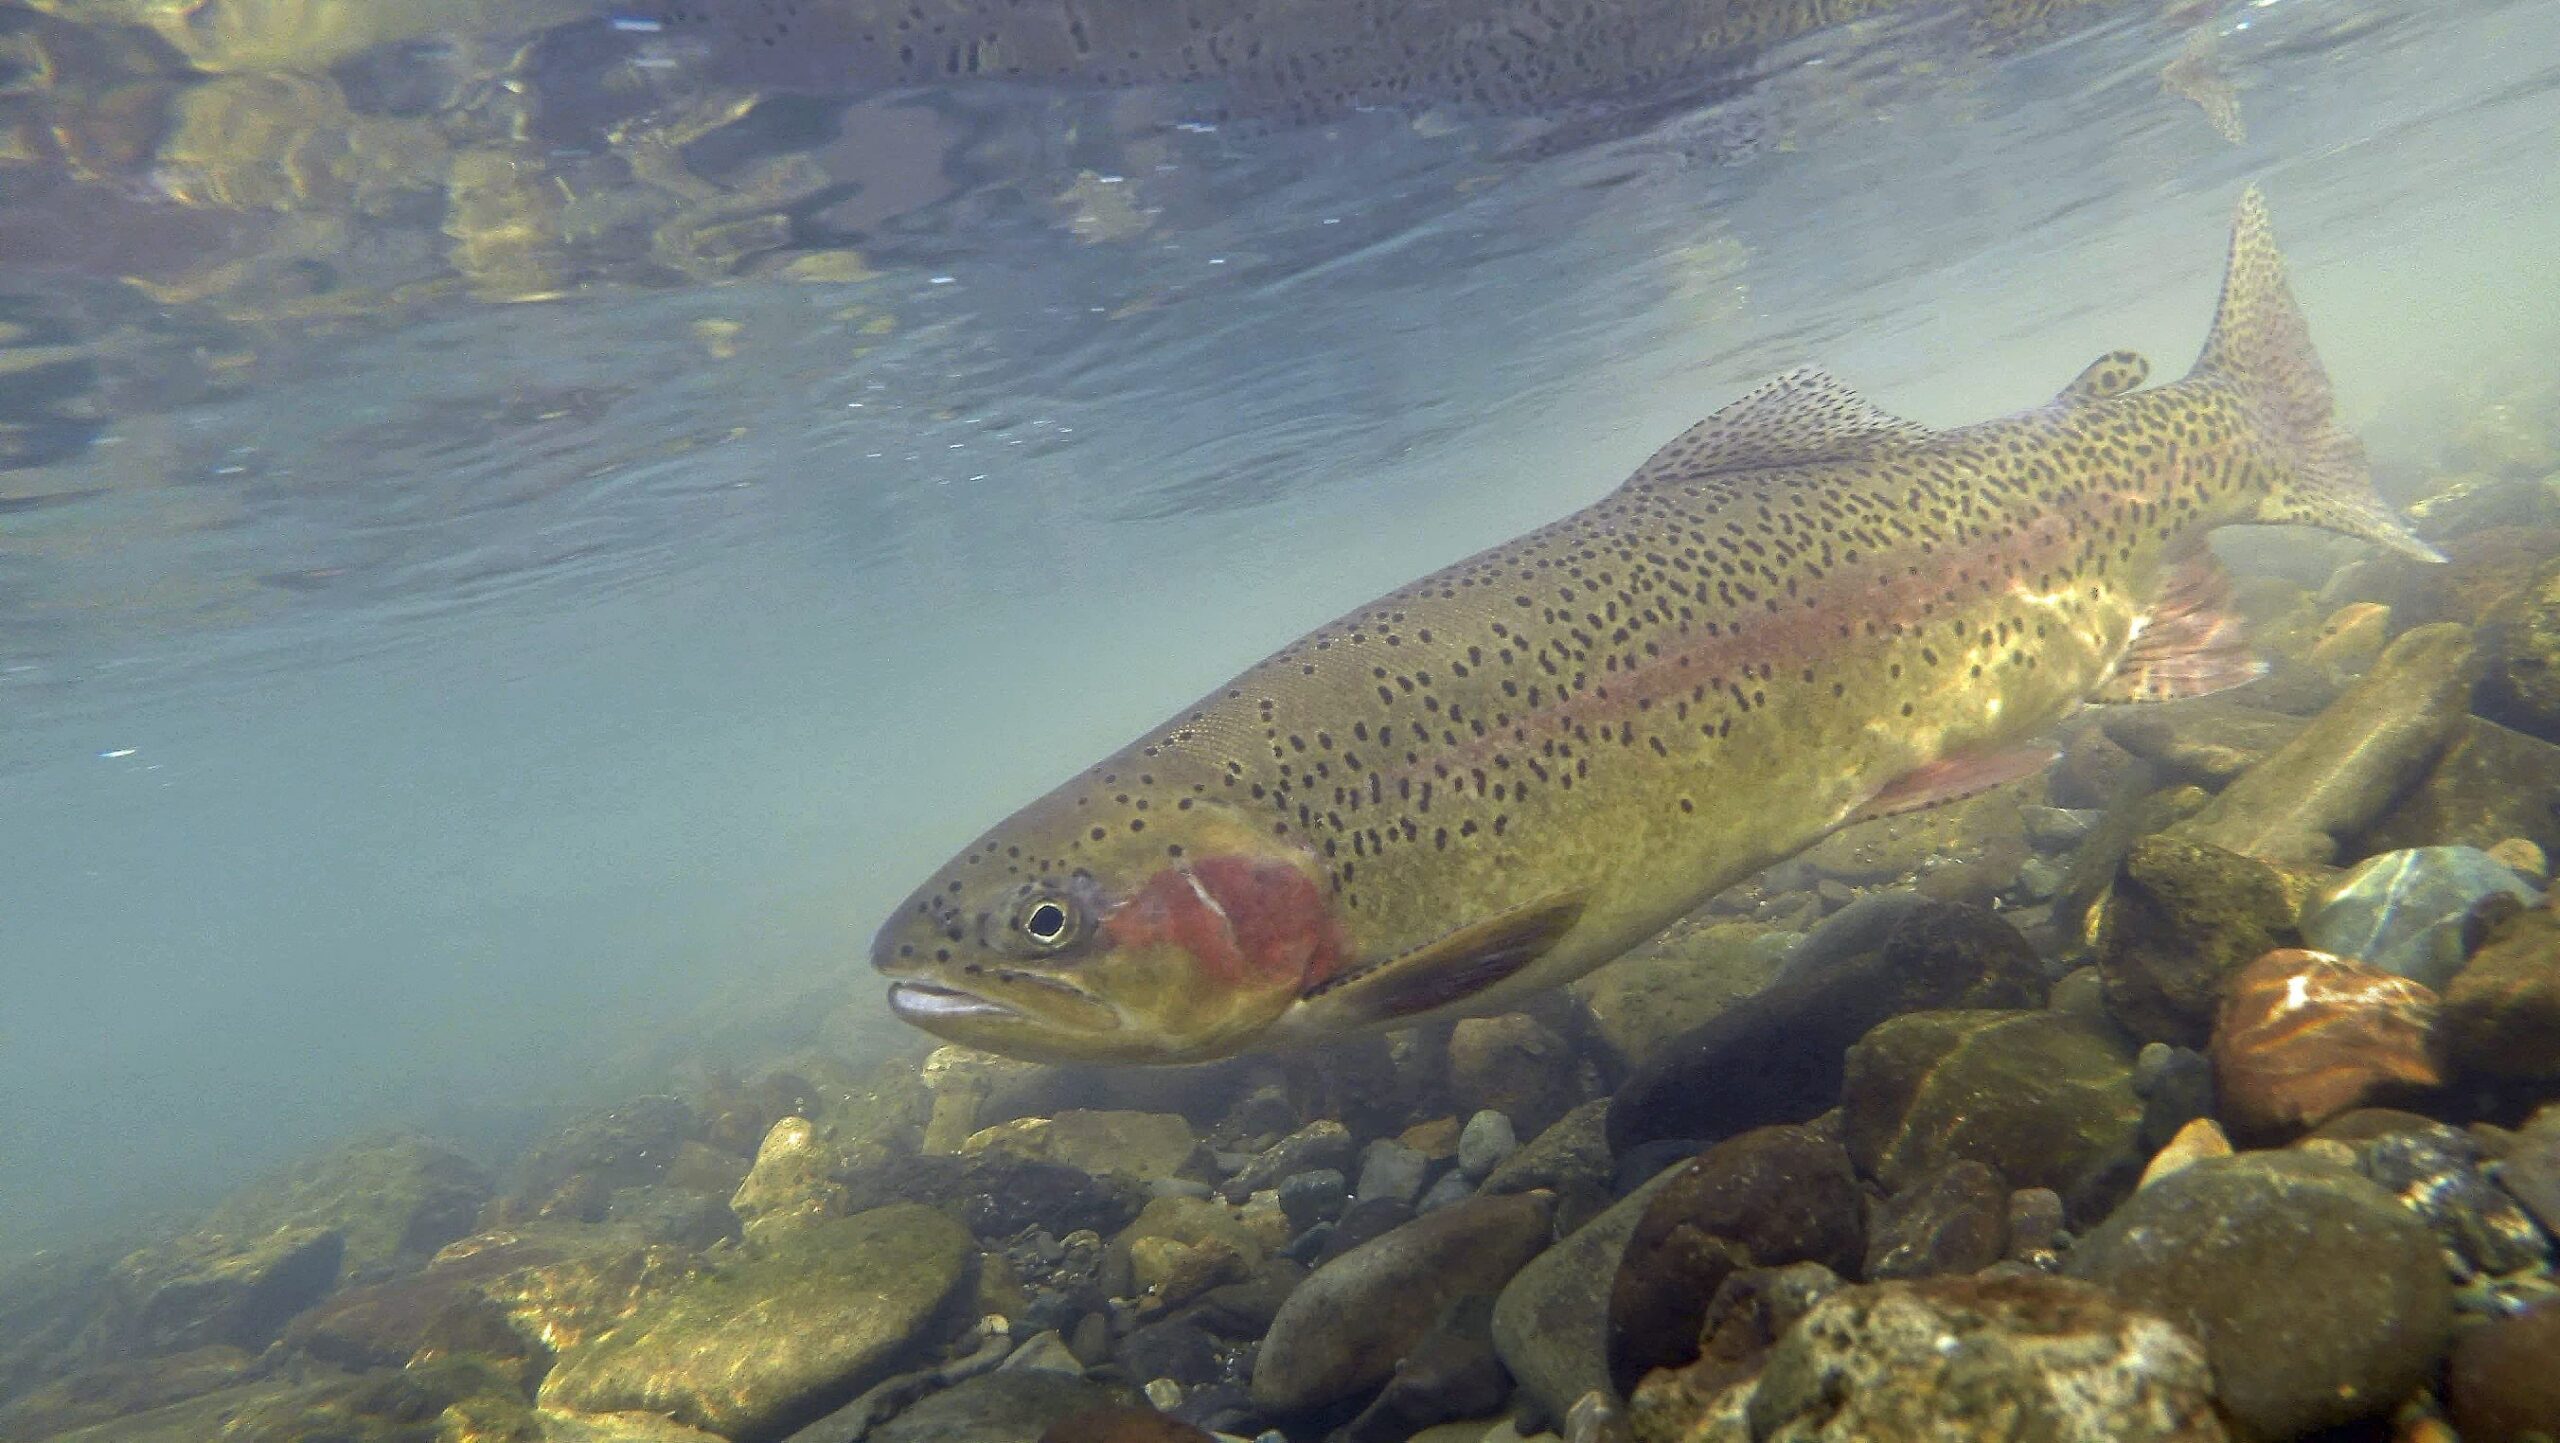 https://caltrout.org/wp-content/uploads/2019/05/8-Phil-Reedy-Spawning-RainbowCaltrout2015-41-scaled.jpg